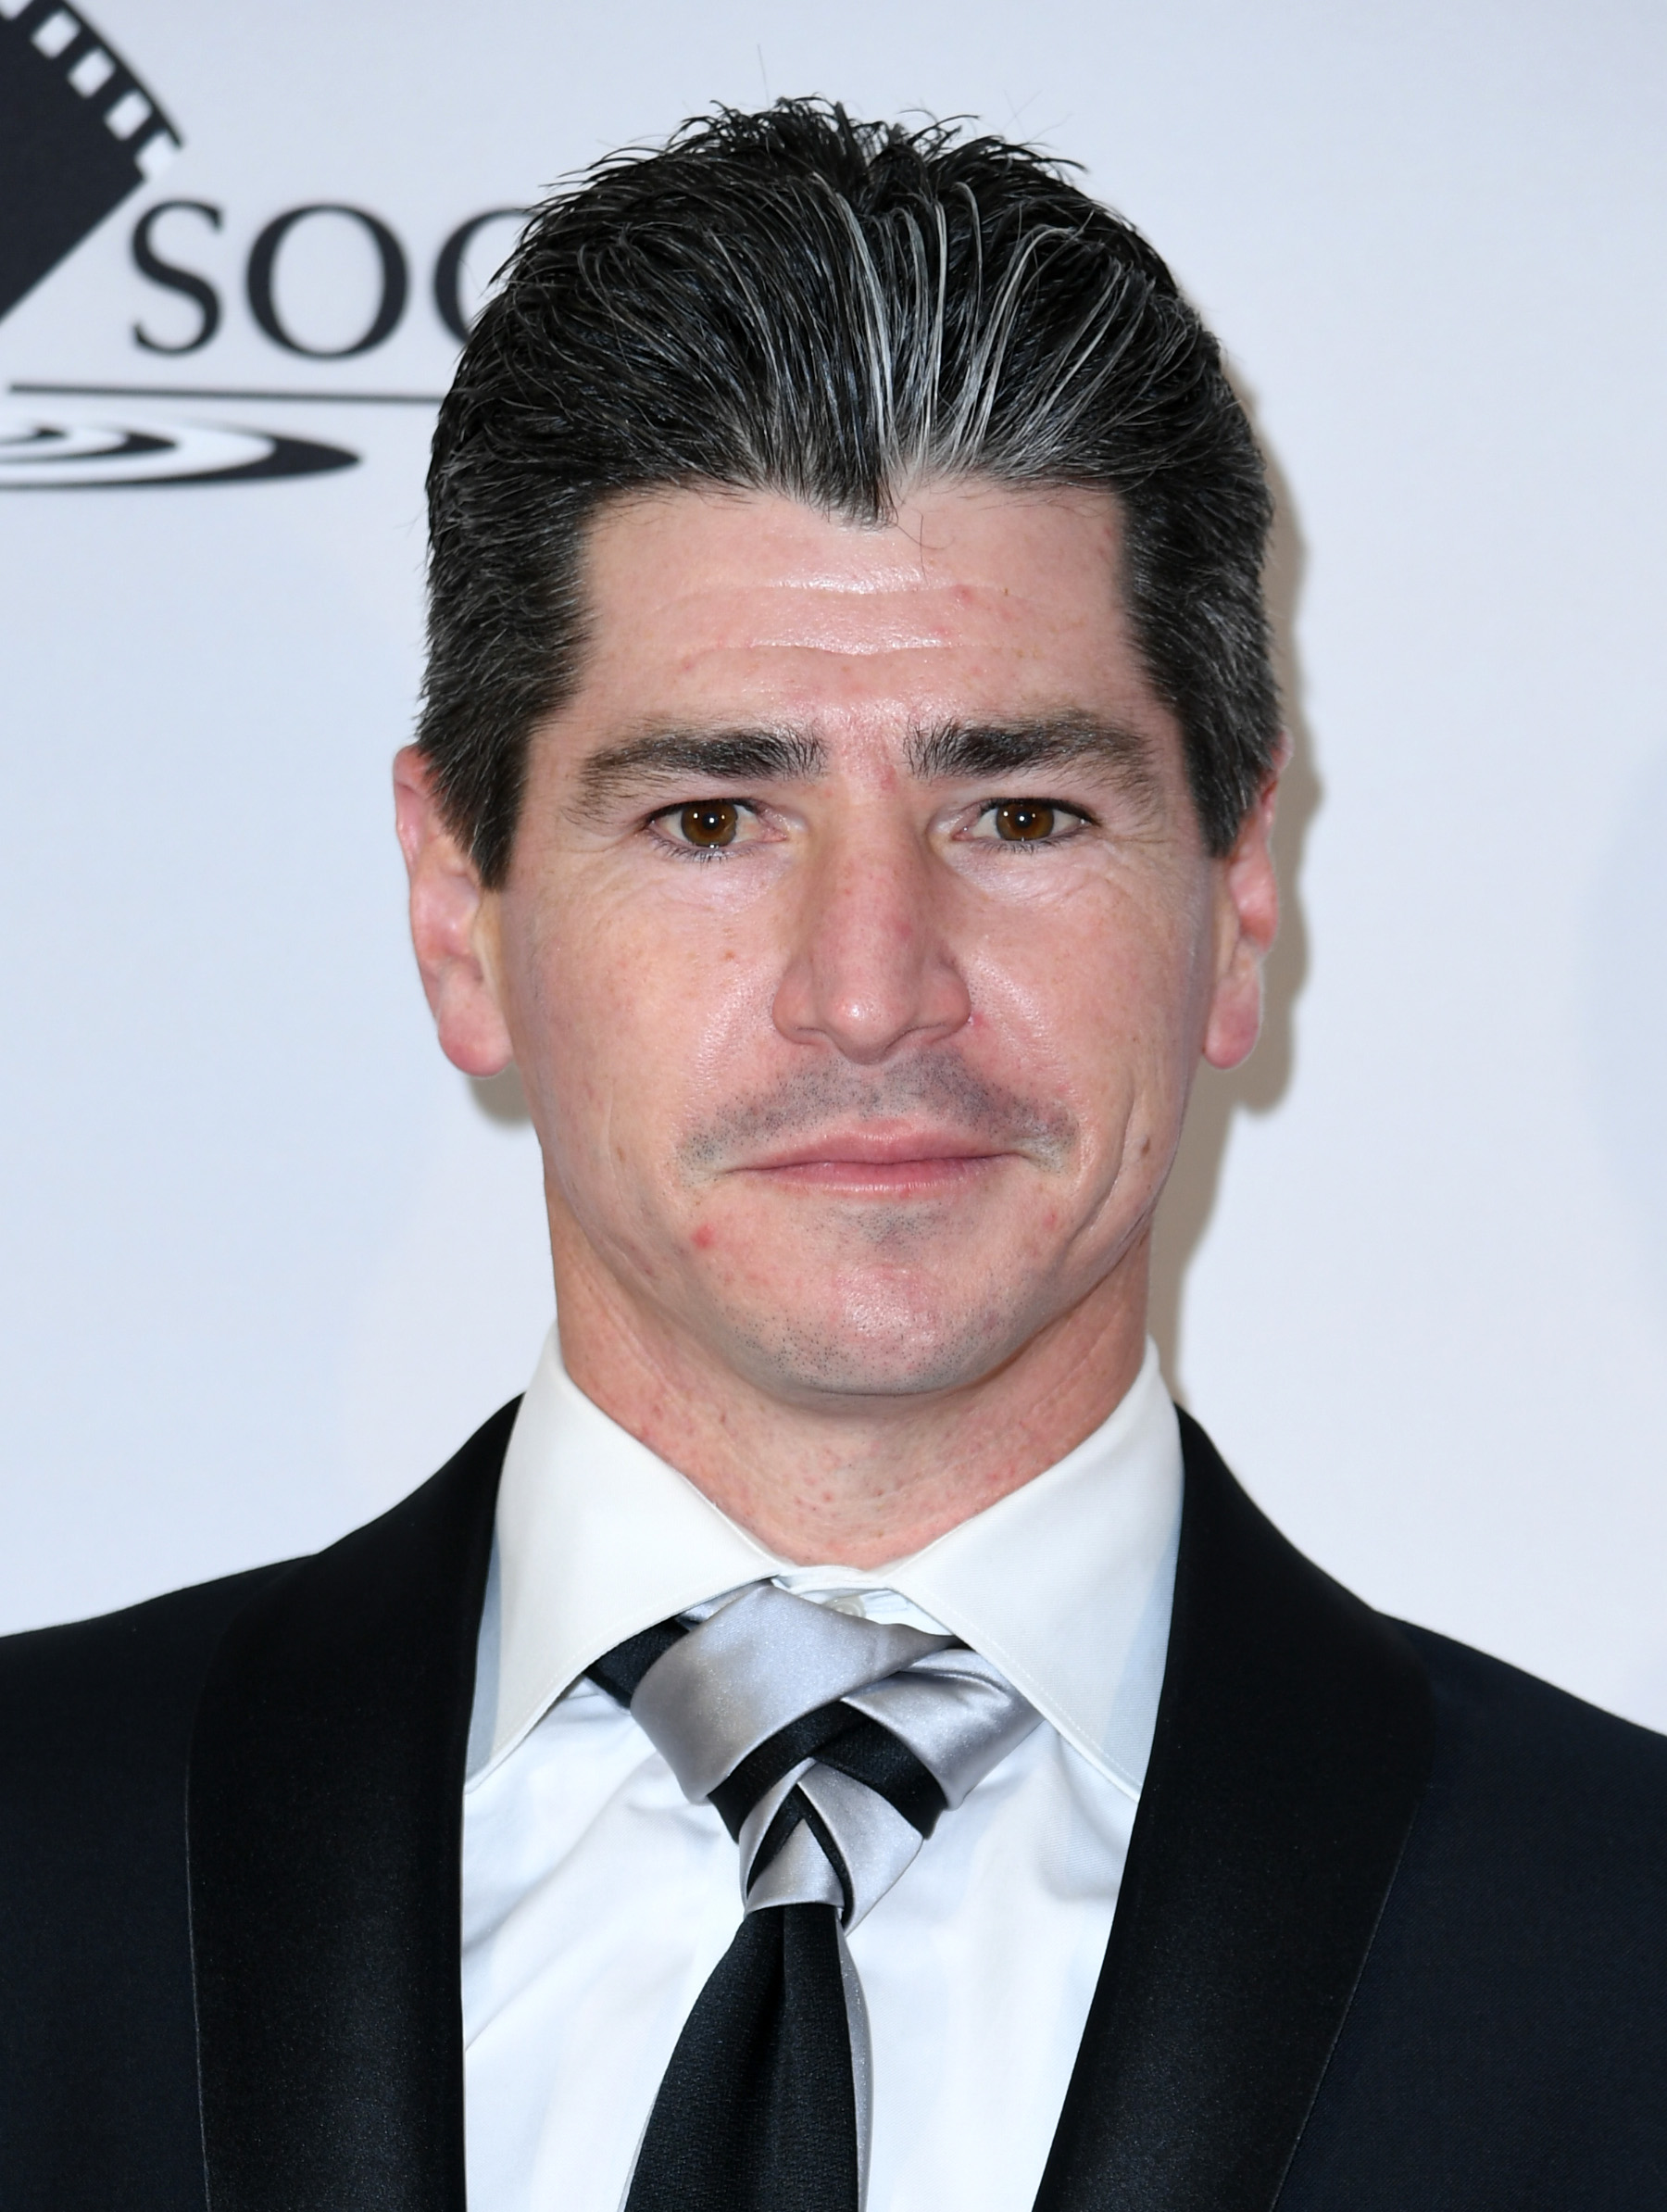 <p>Michael Fishman turned his attention from acting to producing in the late '90s. He produced 58 episodes of "The Roseanne Show" between 1998 and 2000 and was nominated for a Sports Emmy for outstanding production design/art direction for his work on "Sports Science" in 2007. He returned to the acting world in 2018 when "Roseanne" came back to TV, then reprised his role on "The Conners," on which he plays a grown-up D.J. Conner. Michael wed Jennifer Briner, with whom he has two kids, in 1999. They amicably separated in 2017 and she formally <a href="https://www.wonderwall.com/news/roseanne-star-michael-fishman-and-wife-20-years-divorcing-3019312.article">filed for divorce</a> in 2019.</p>